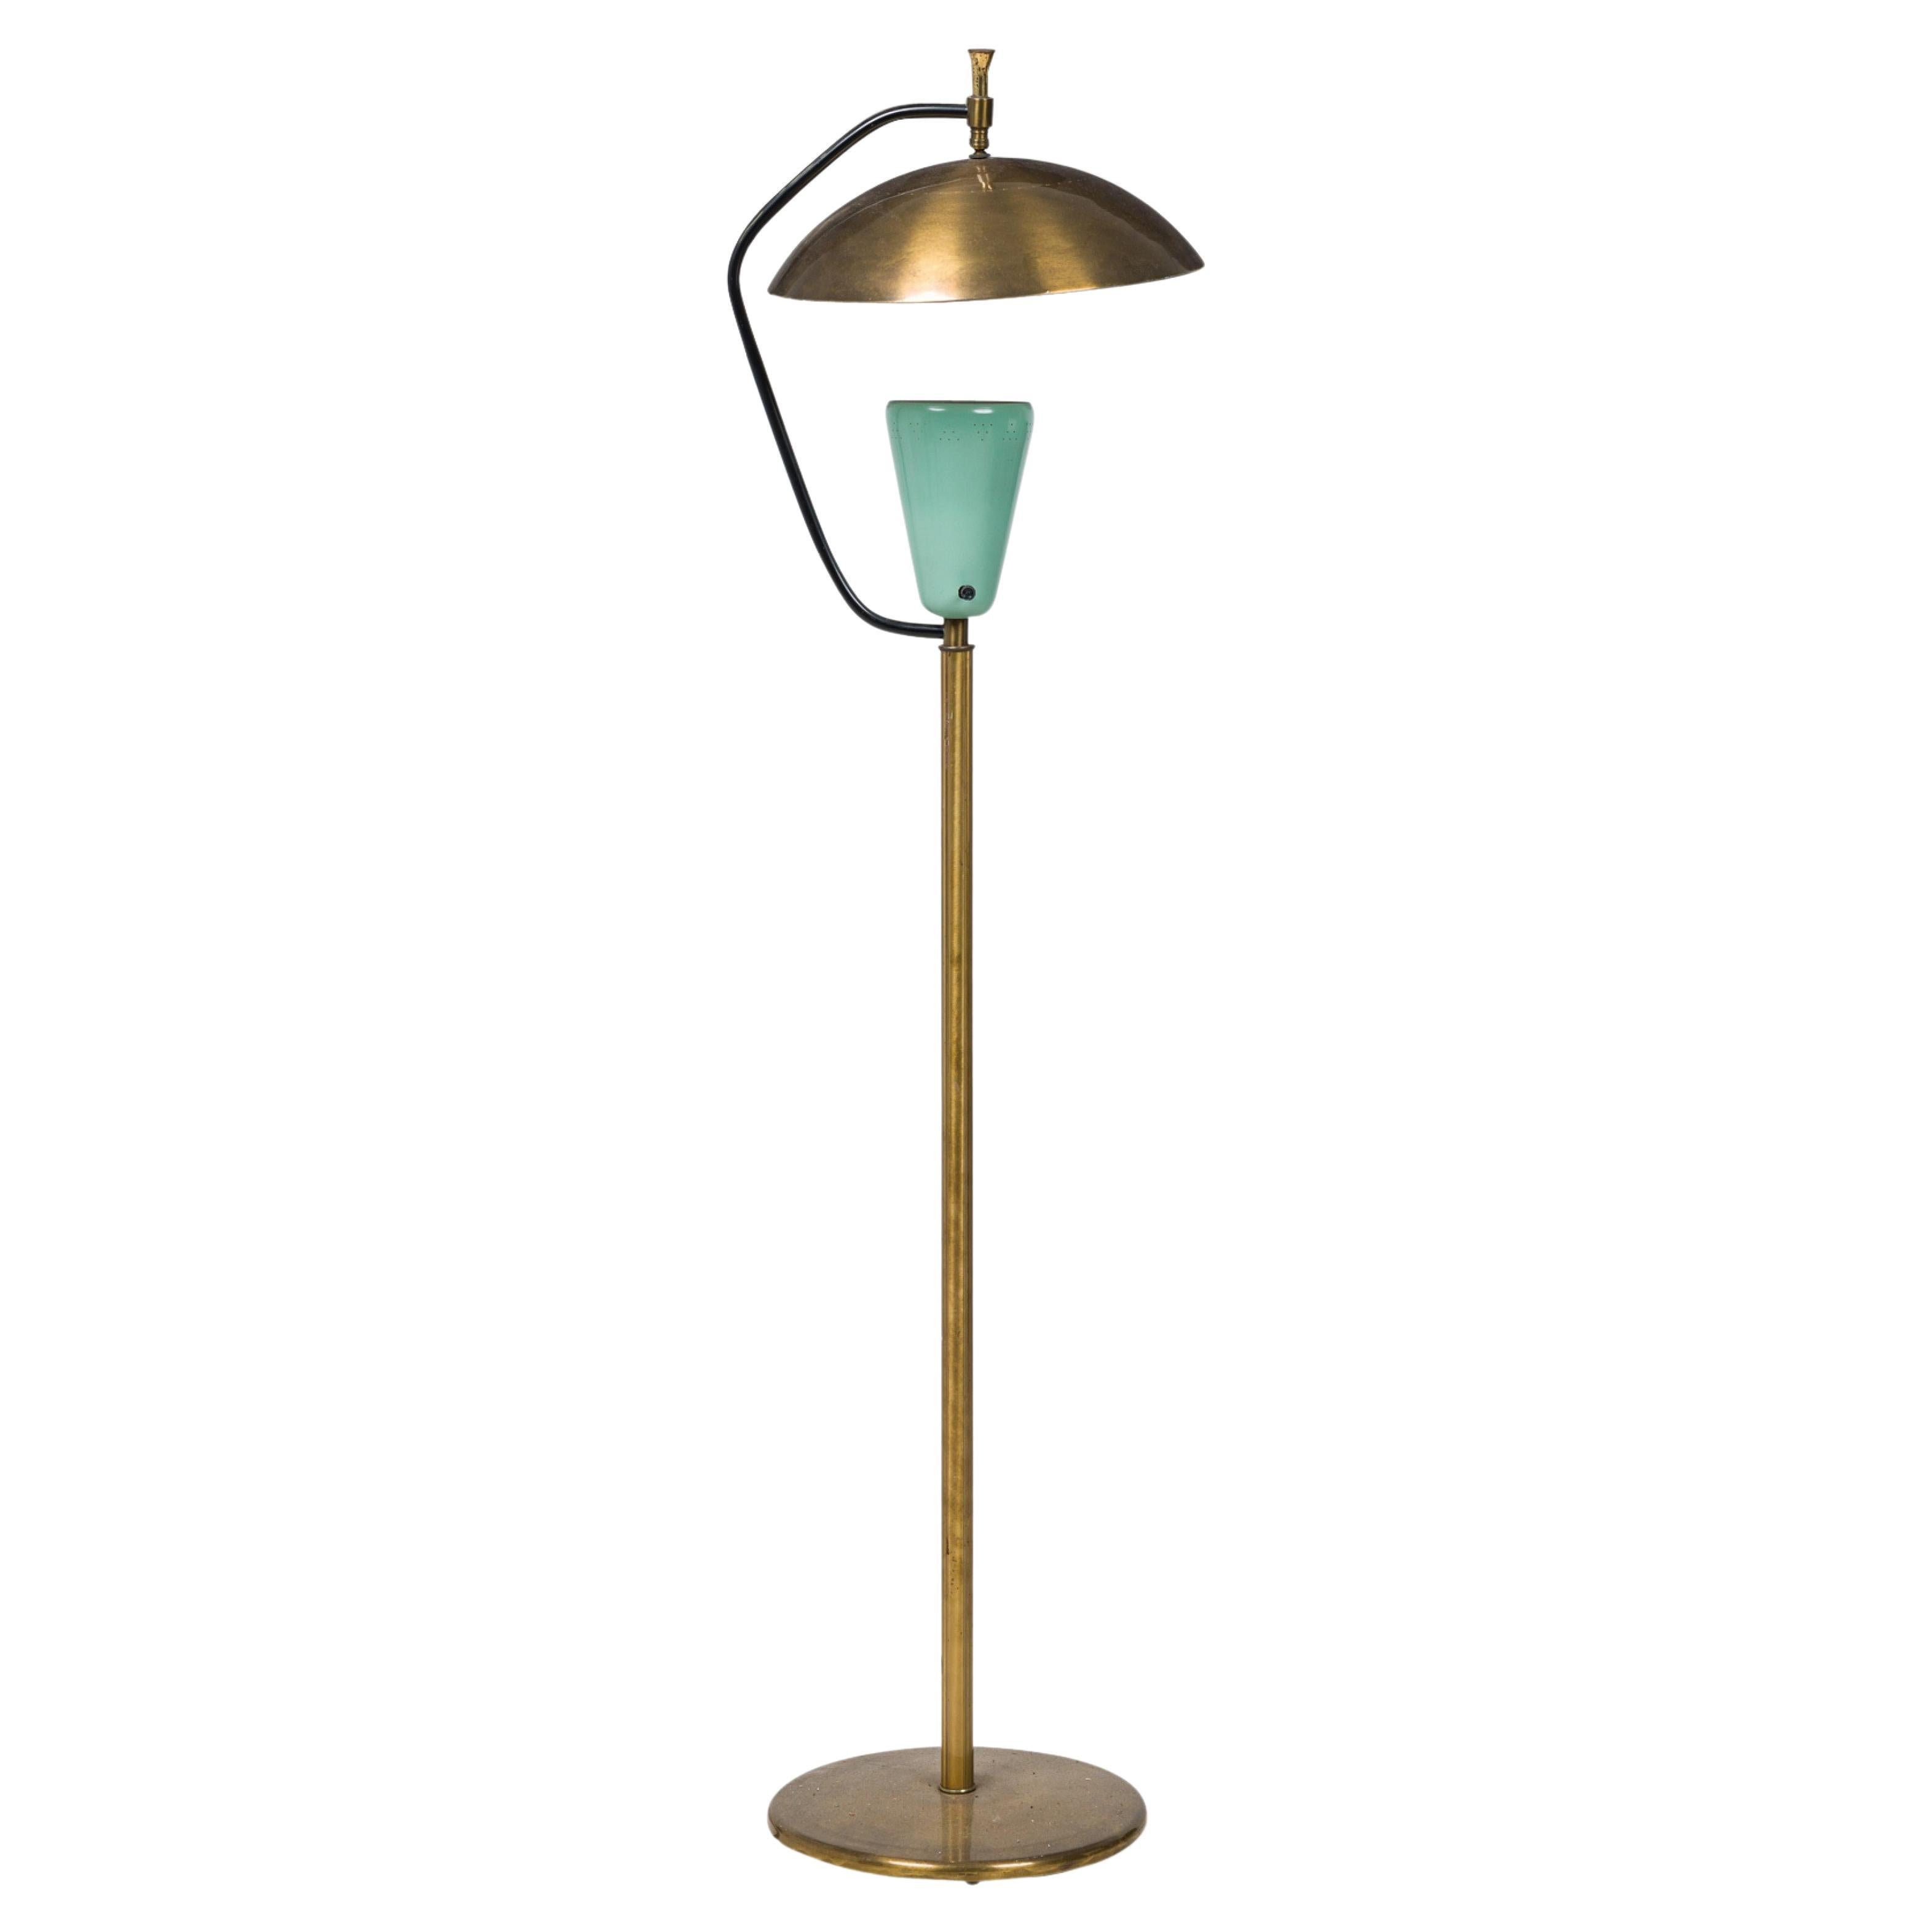 Pierre Guariche Midcentury French Brass and Green Enamel Floor Lamp For Sale